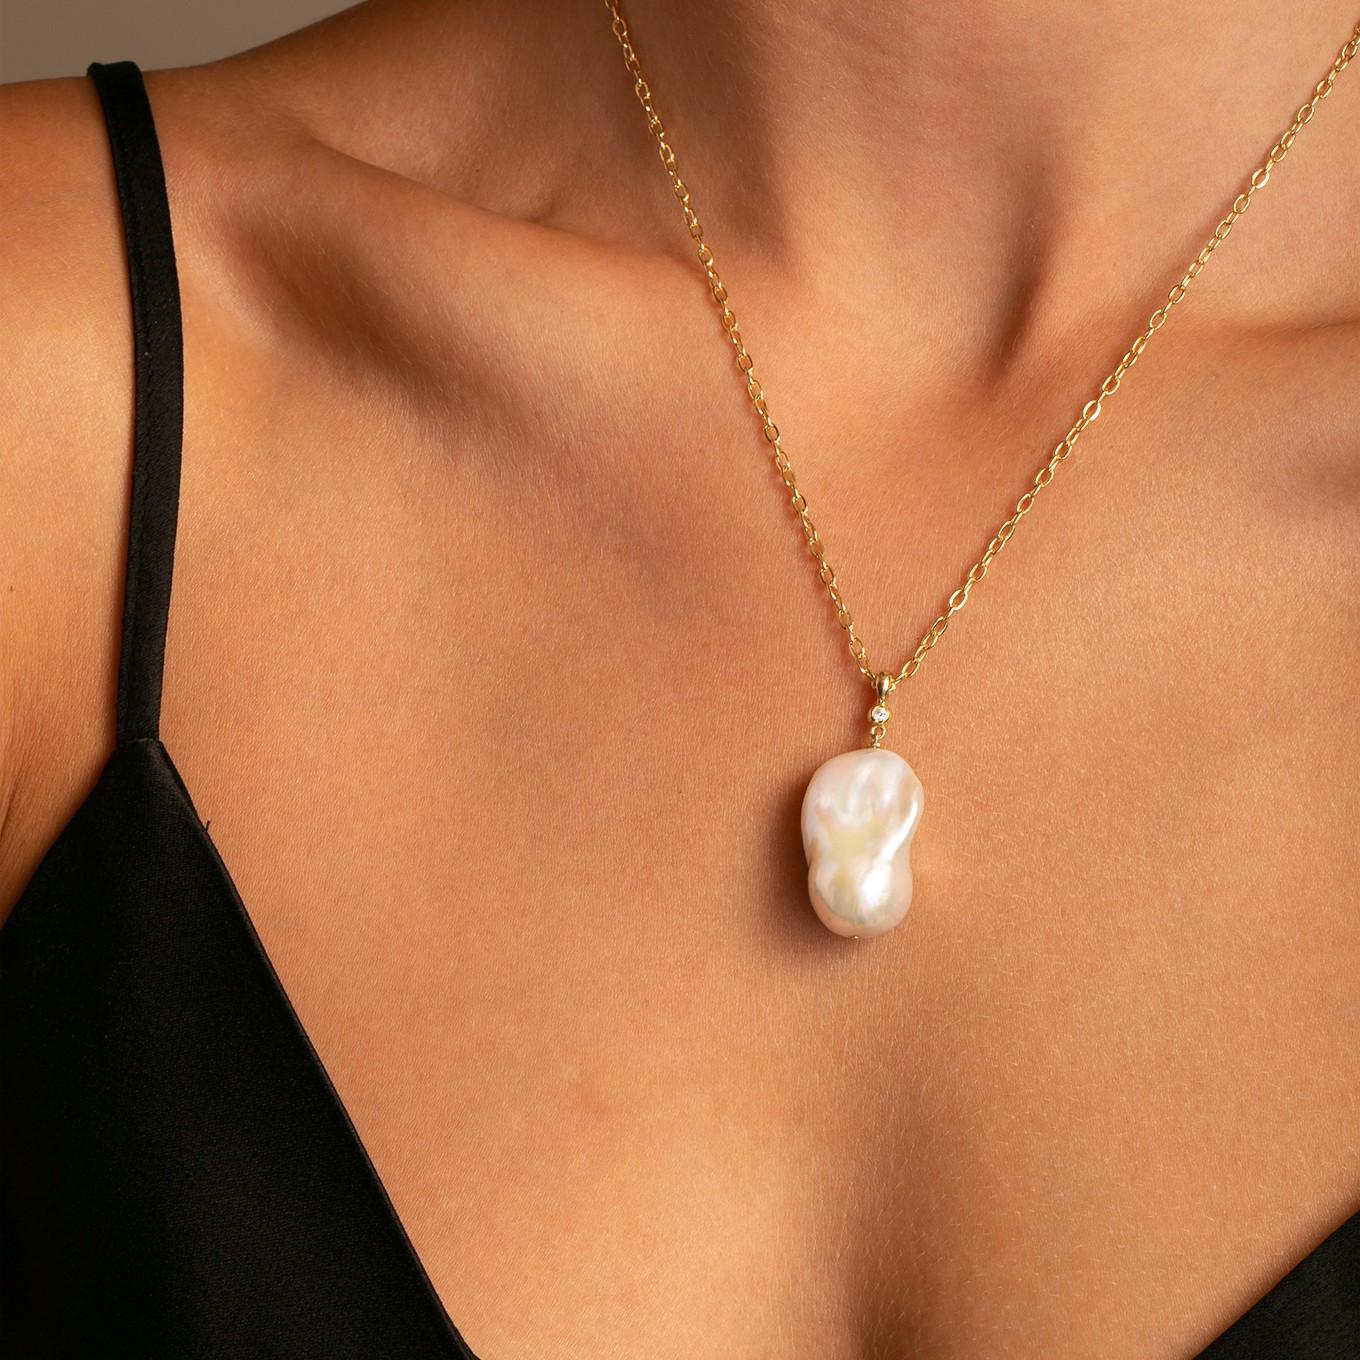 Stunning Large Baroque (14-17mm) Pearl  with a sparkling Bezel Set diamond set in 14k high polish yellow gold, with 18 inch cable chain.

Diamond - 1 Round Sparkling 2mm G/SI1 color. (.03ctw)

A modern update on the classic pearl pendant – simple